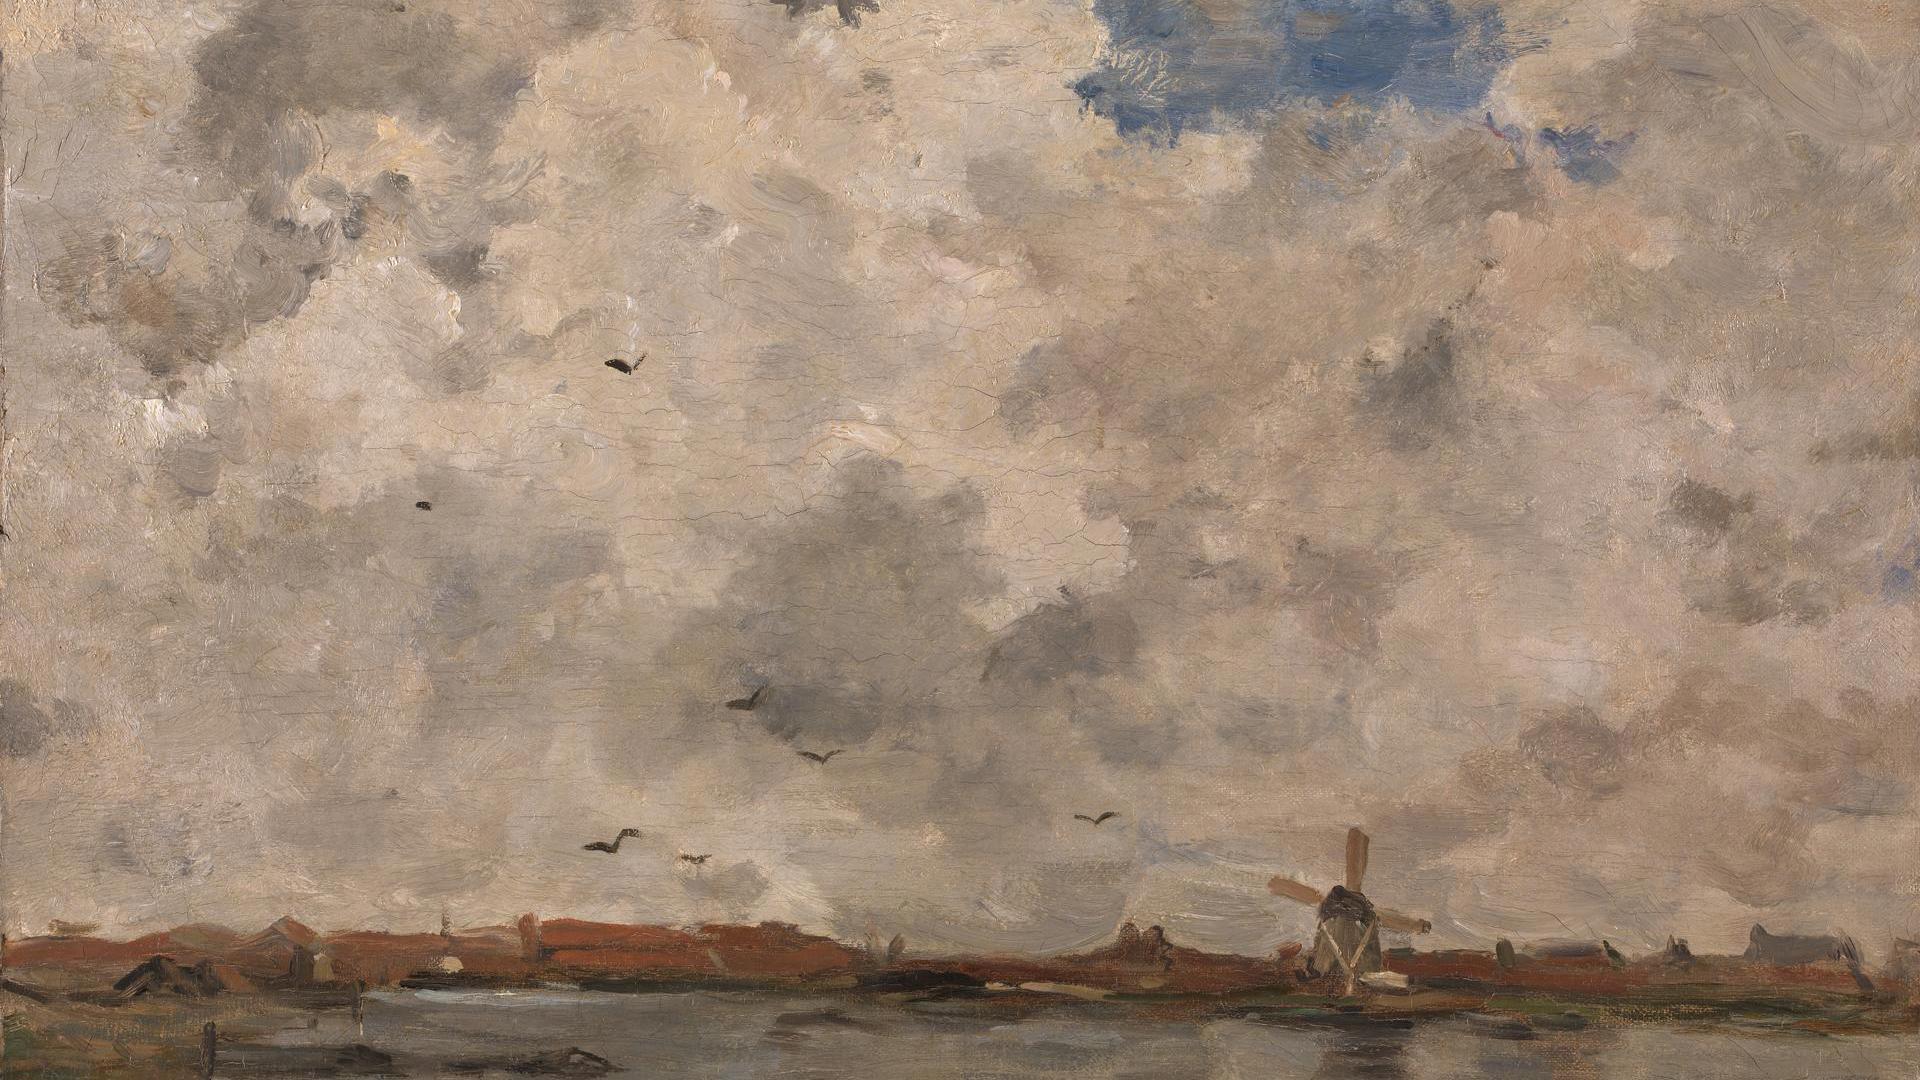 A Windmill and Houses beside Water: Stormy Sky by Jacob Maris